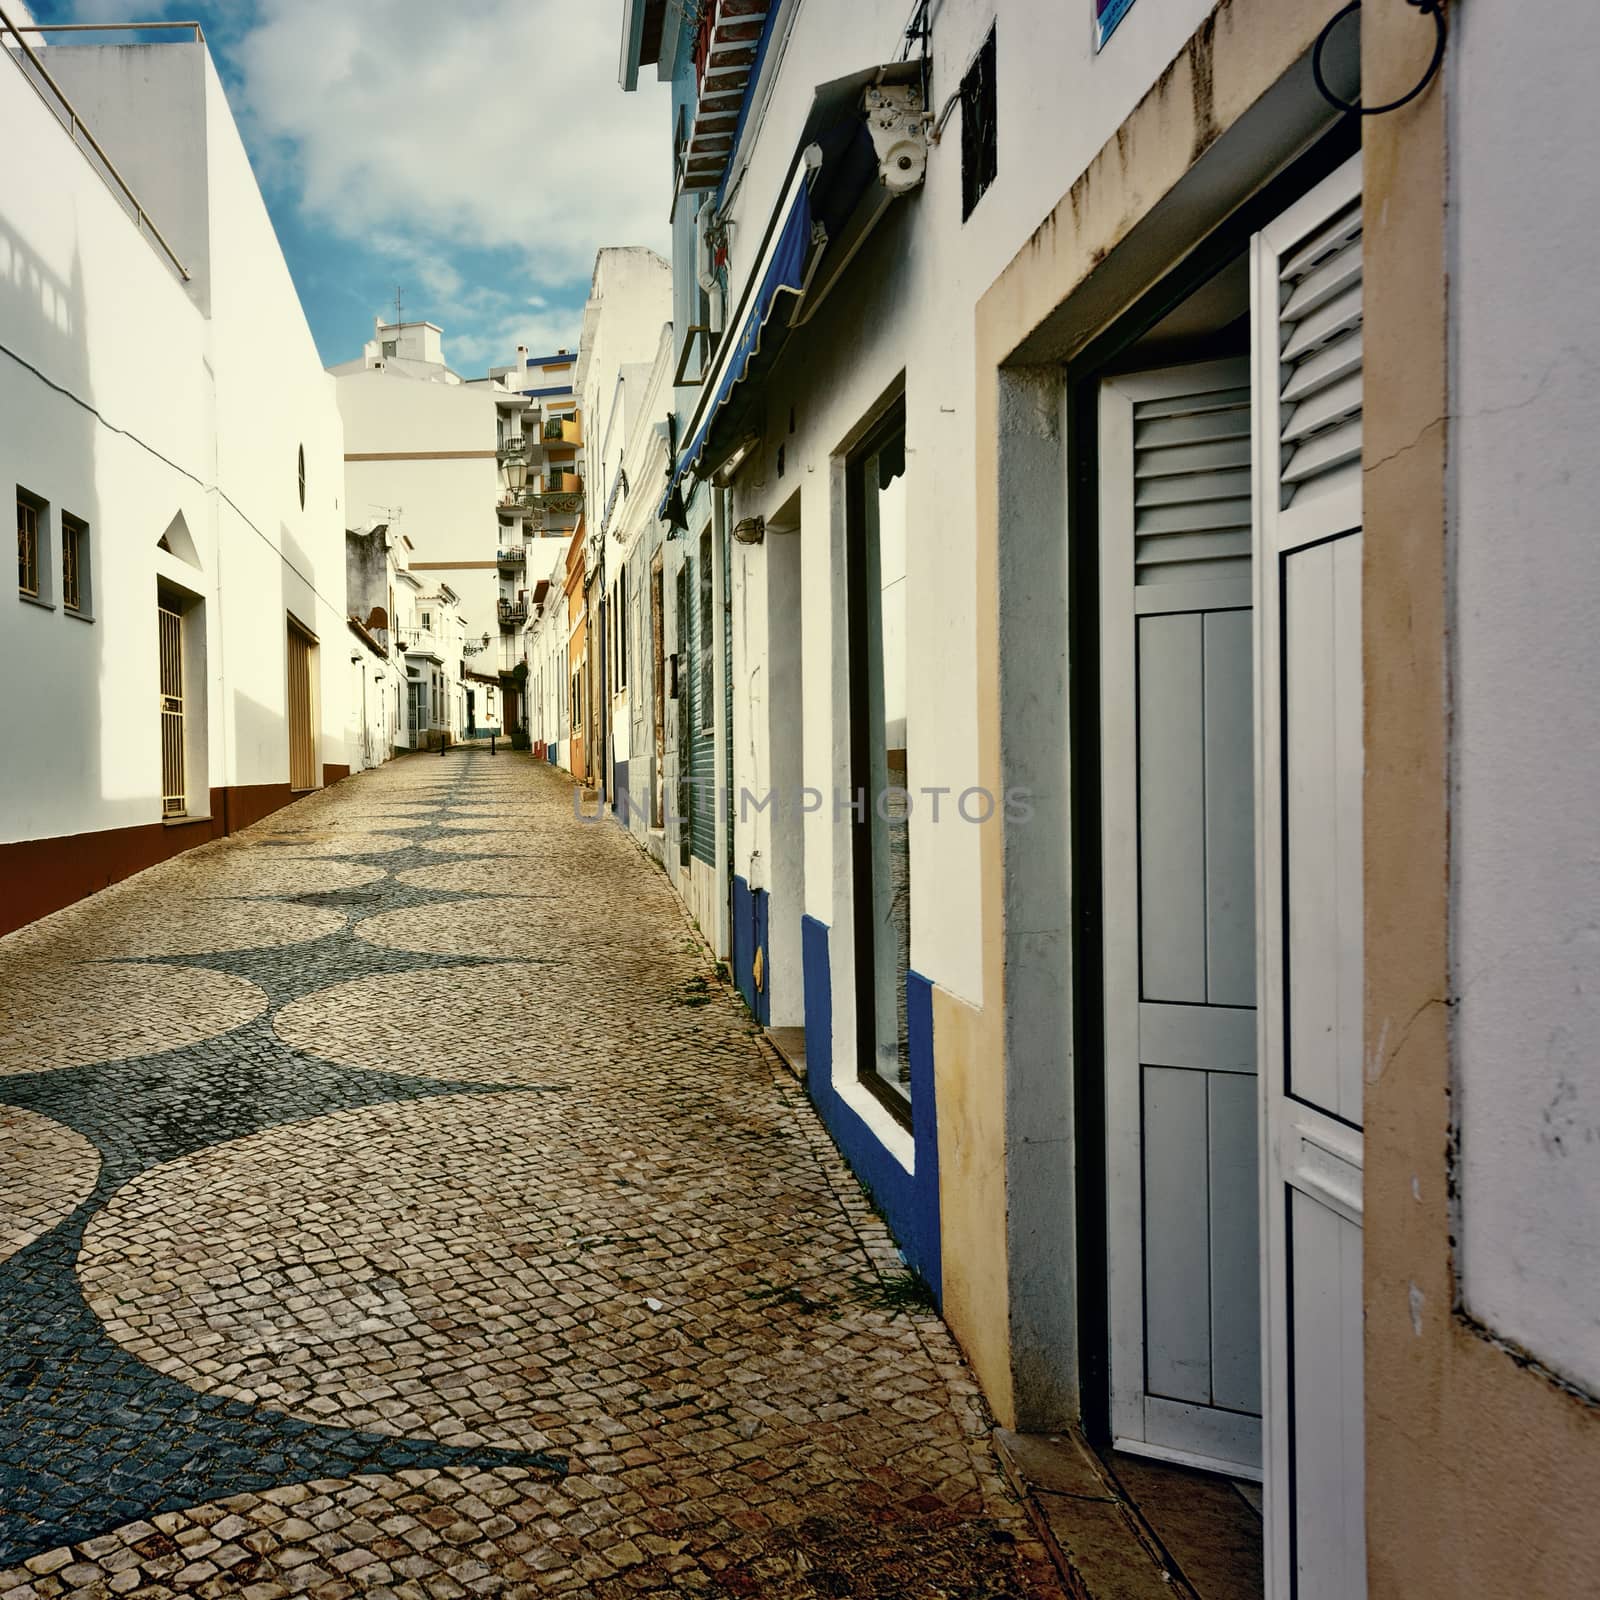 Patterned Pavement in the Medieval Portuguese City of Logos, Vintage Style Toned Picture